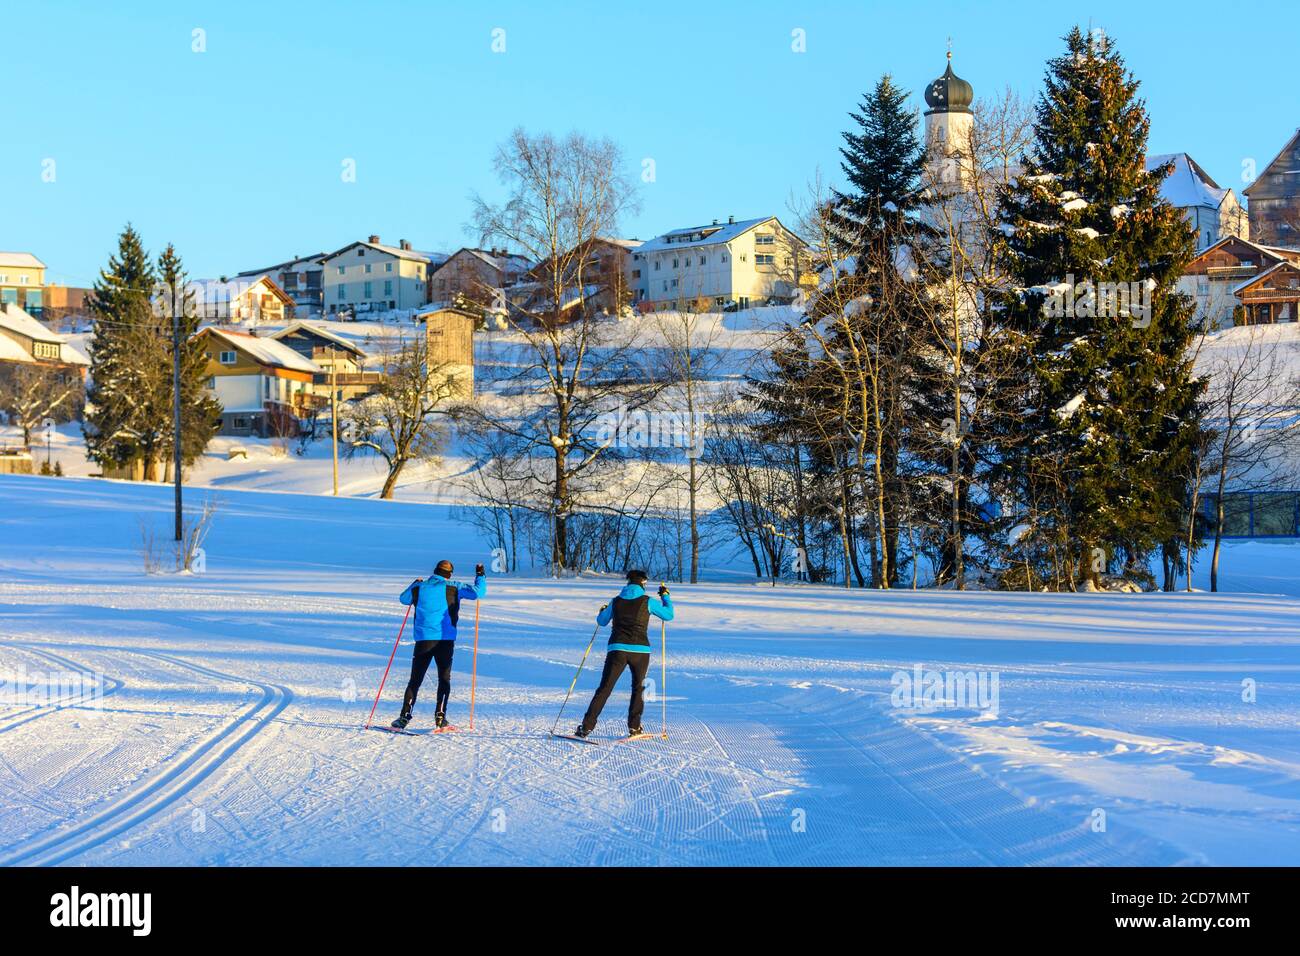 Two skiers doing a skating exercise in late winter afternoon near a village Stock Photo